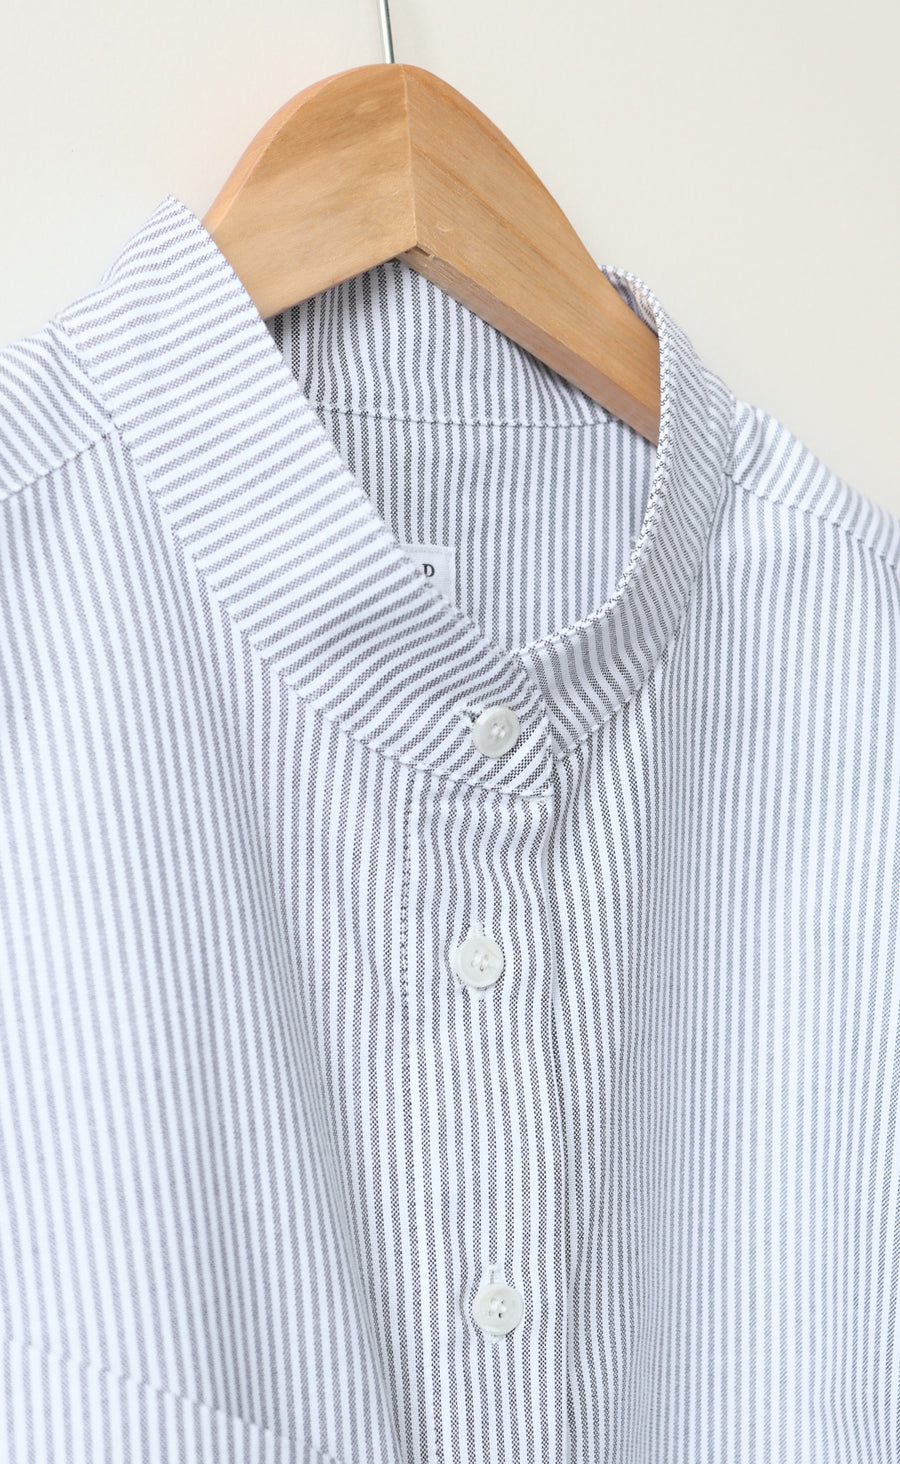 The Tailor - Wayward Fit Tunic - Black & White Striped Oxford